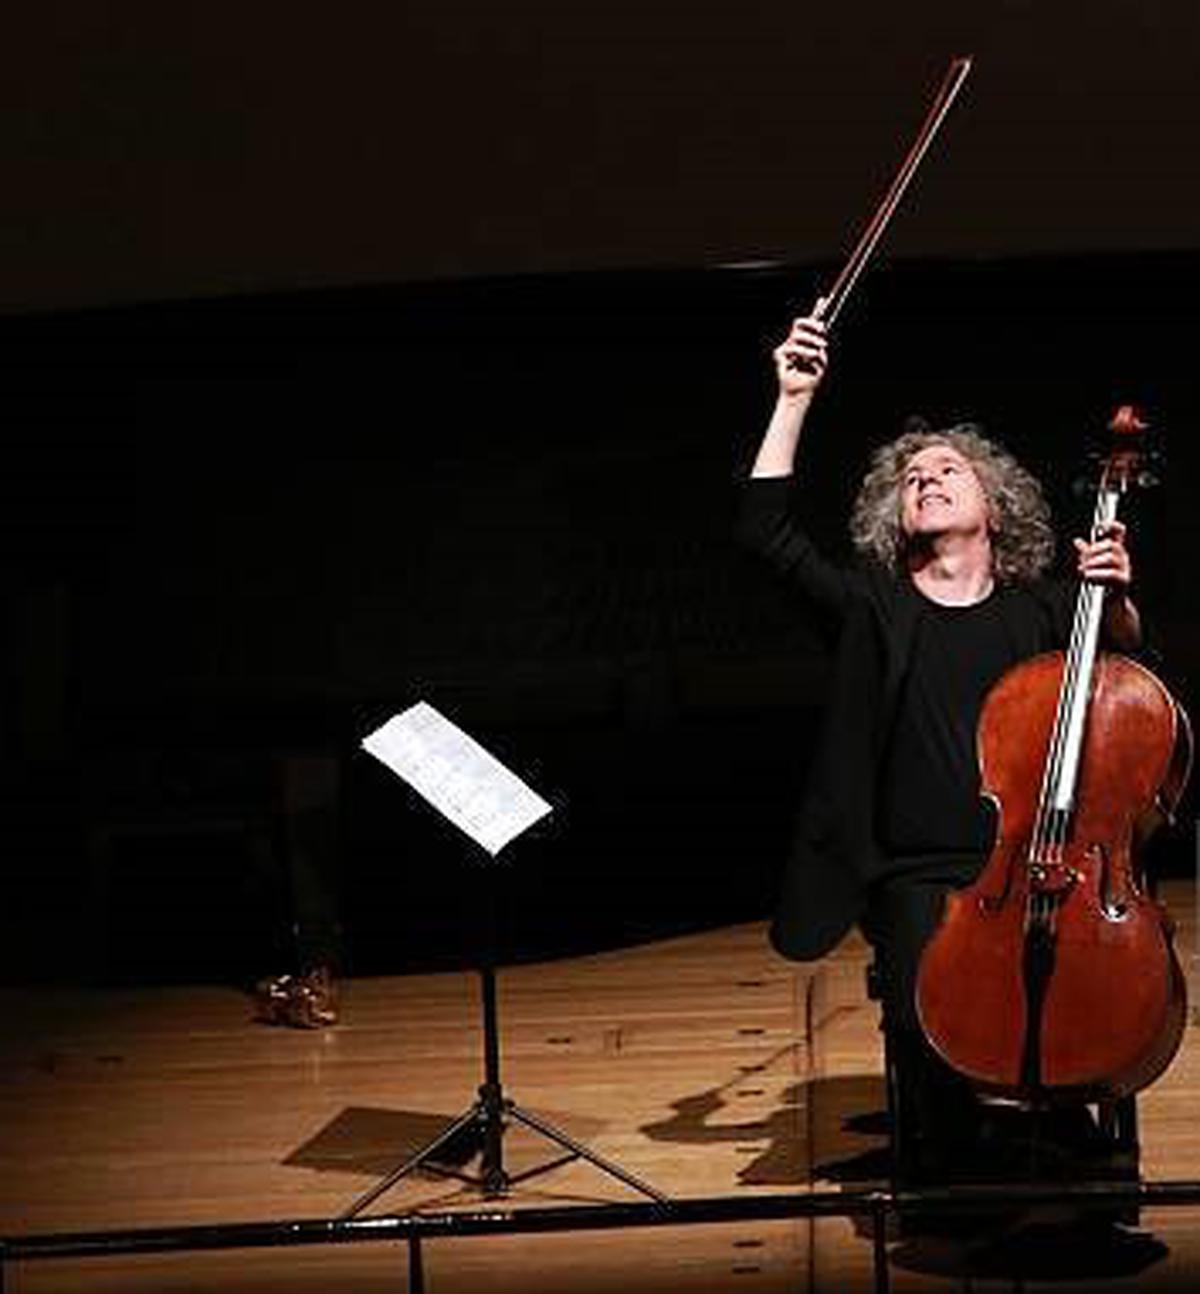 British cellist Steven Isserlis performs works by composers Bach with ‘Cello Suites’ and Gyorgy Kurtag with ‘Signs, Games and Messages’ on stage at Wigmore Hall on February 17, 2016, in London, England.  